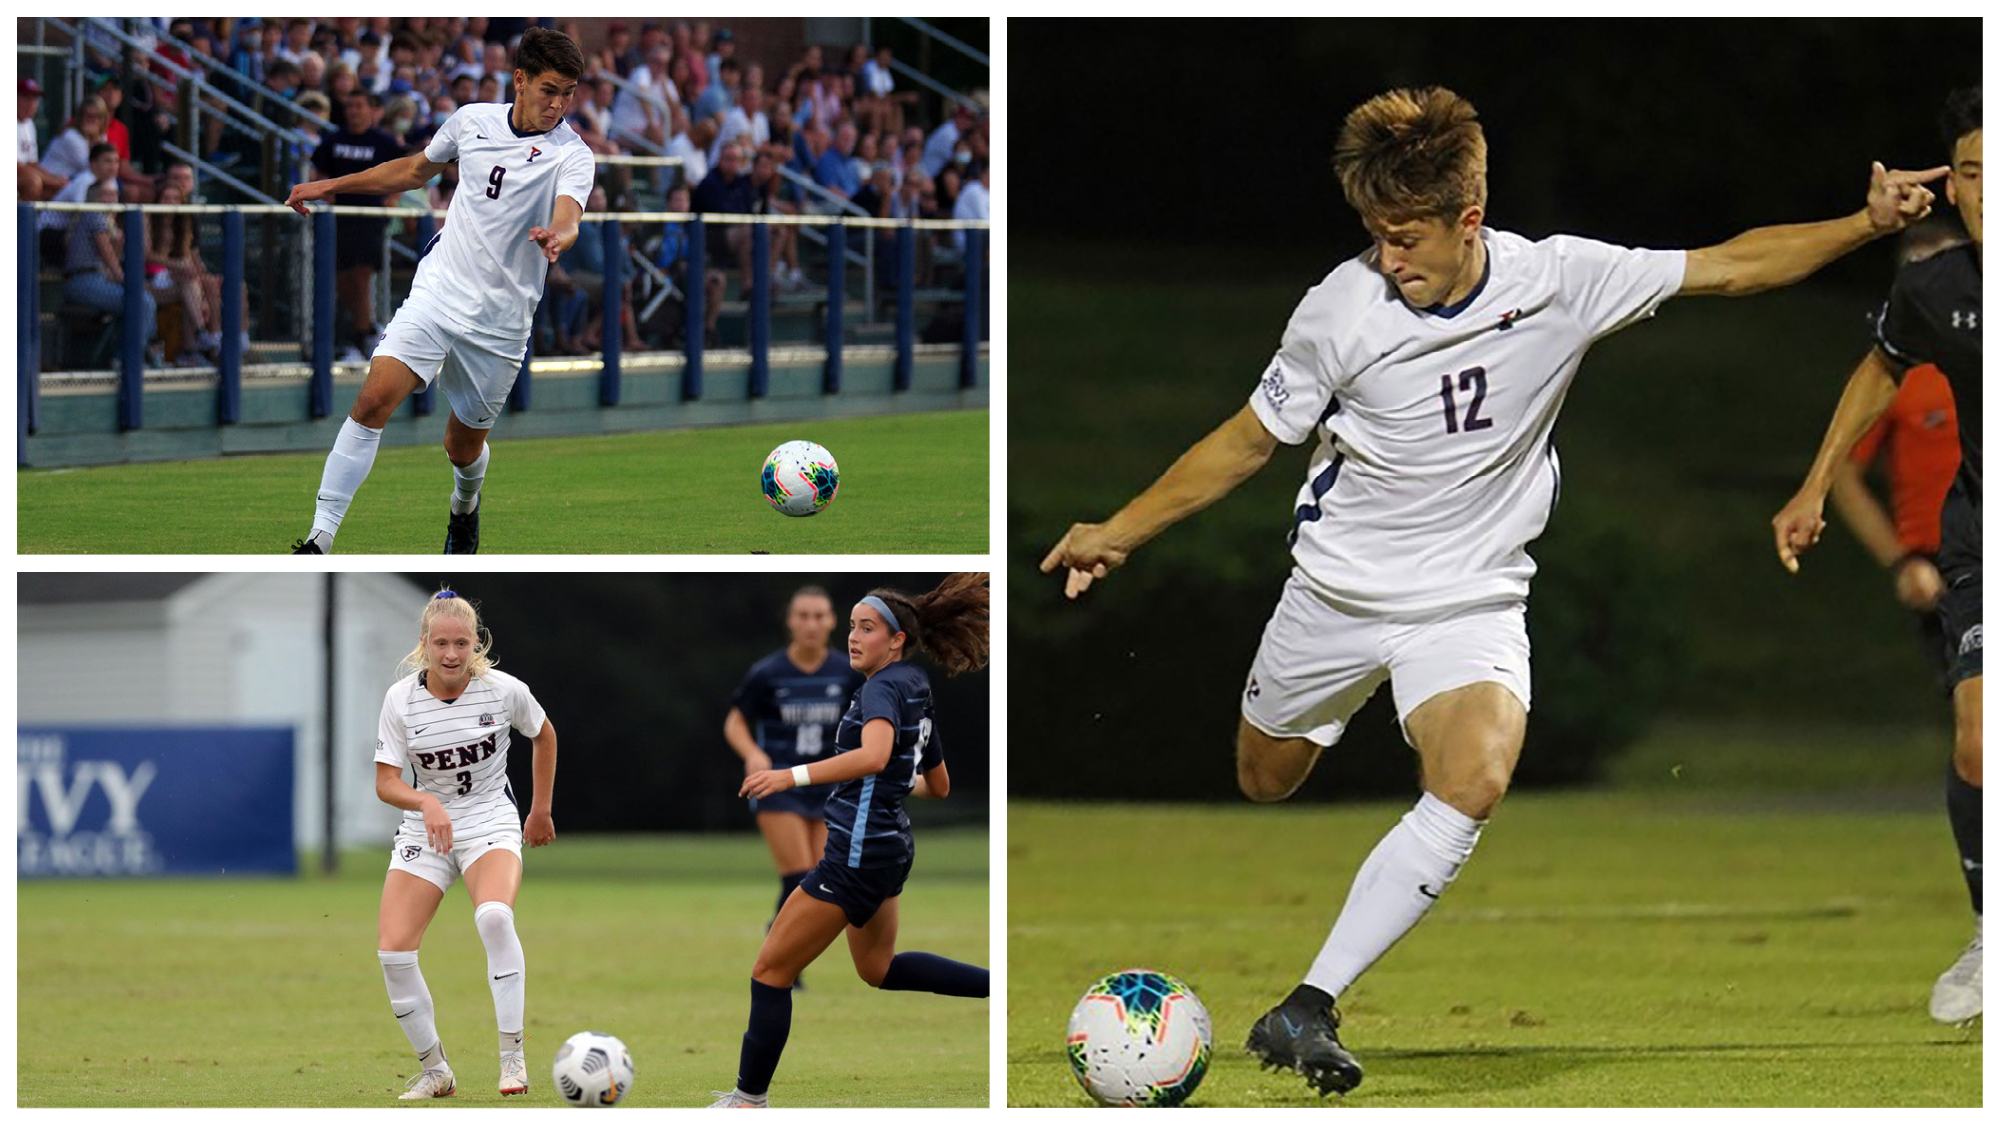 A collage show Ben Stitz (top) Lauren Teuschl (bottom) and Charlie Gaffney (right) wearing their white Penn jerseys and preparing to kick the ball.